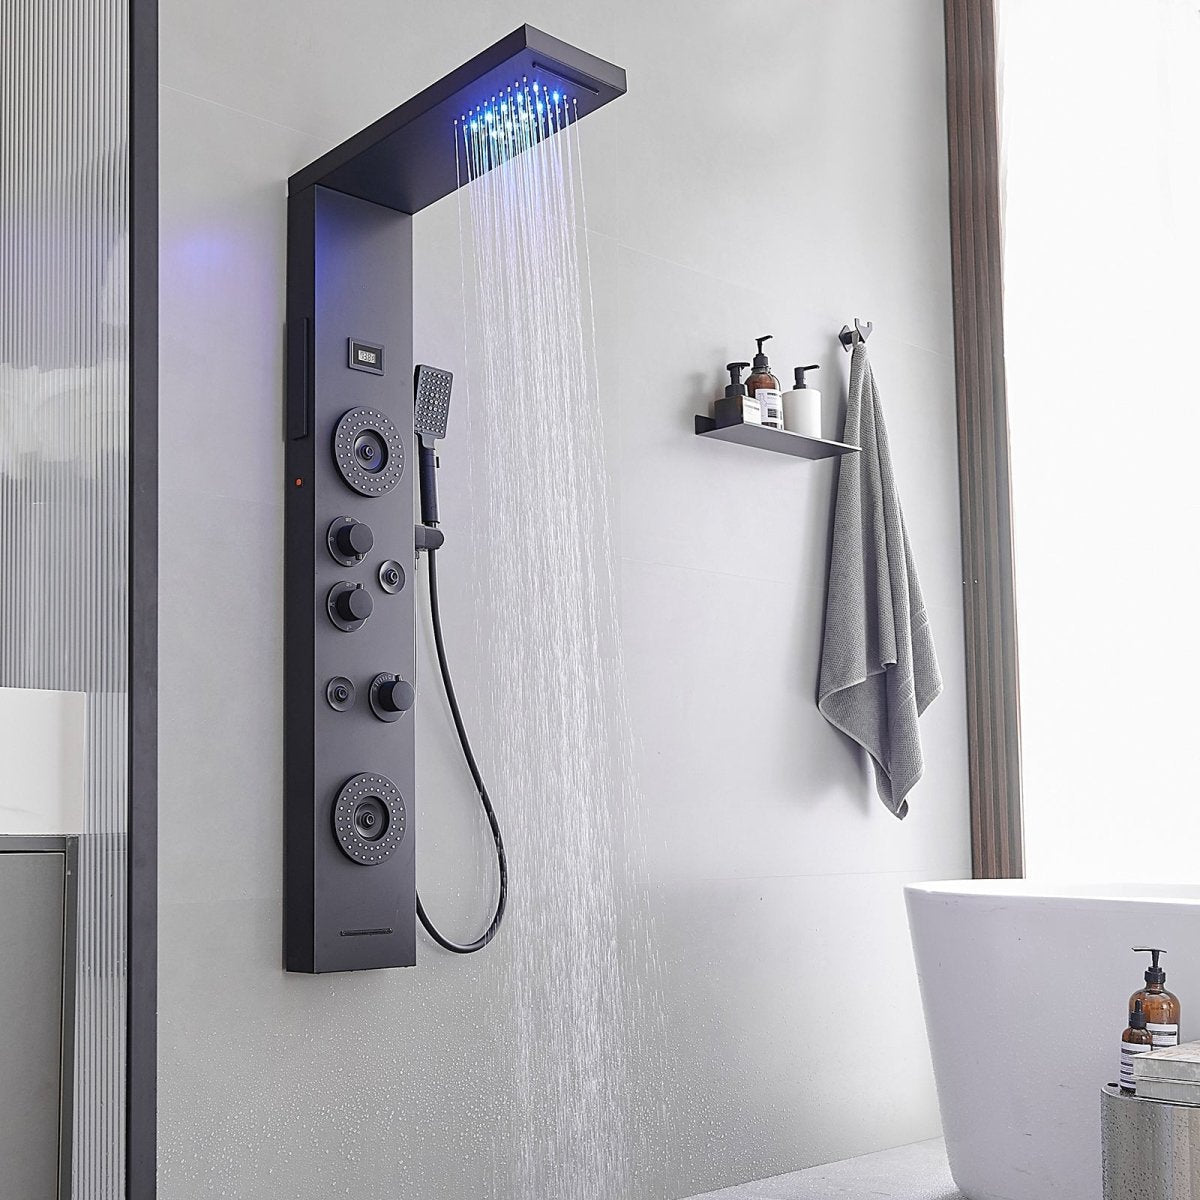 5-Jet Rainfall Shower Panel System in Stainless Steel Black - buyfaucet.com